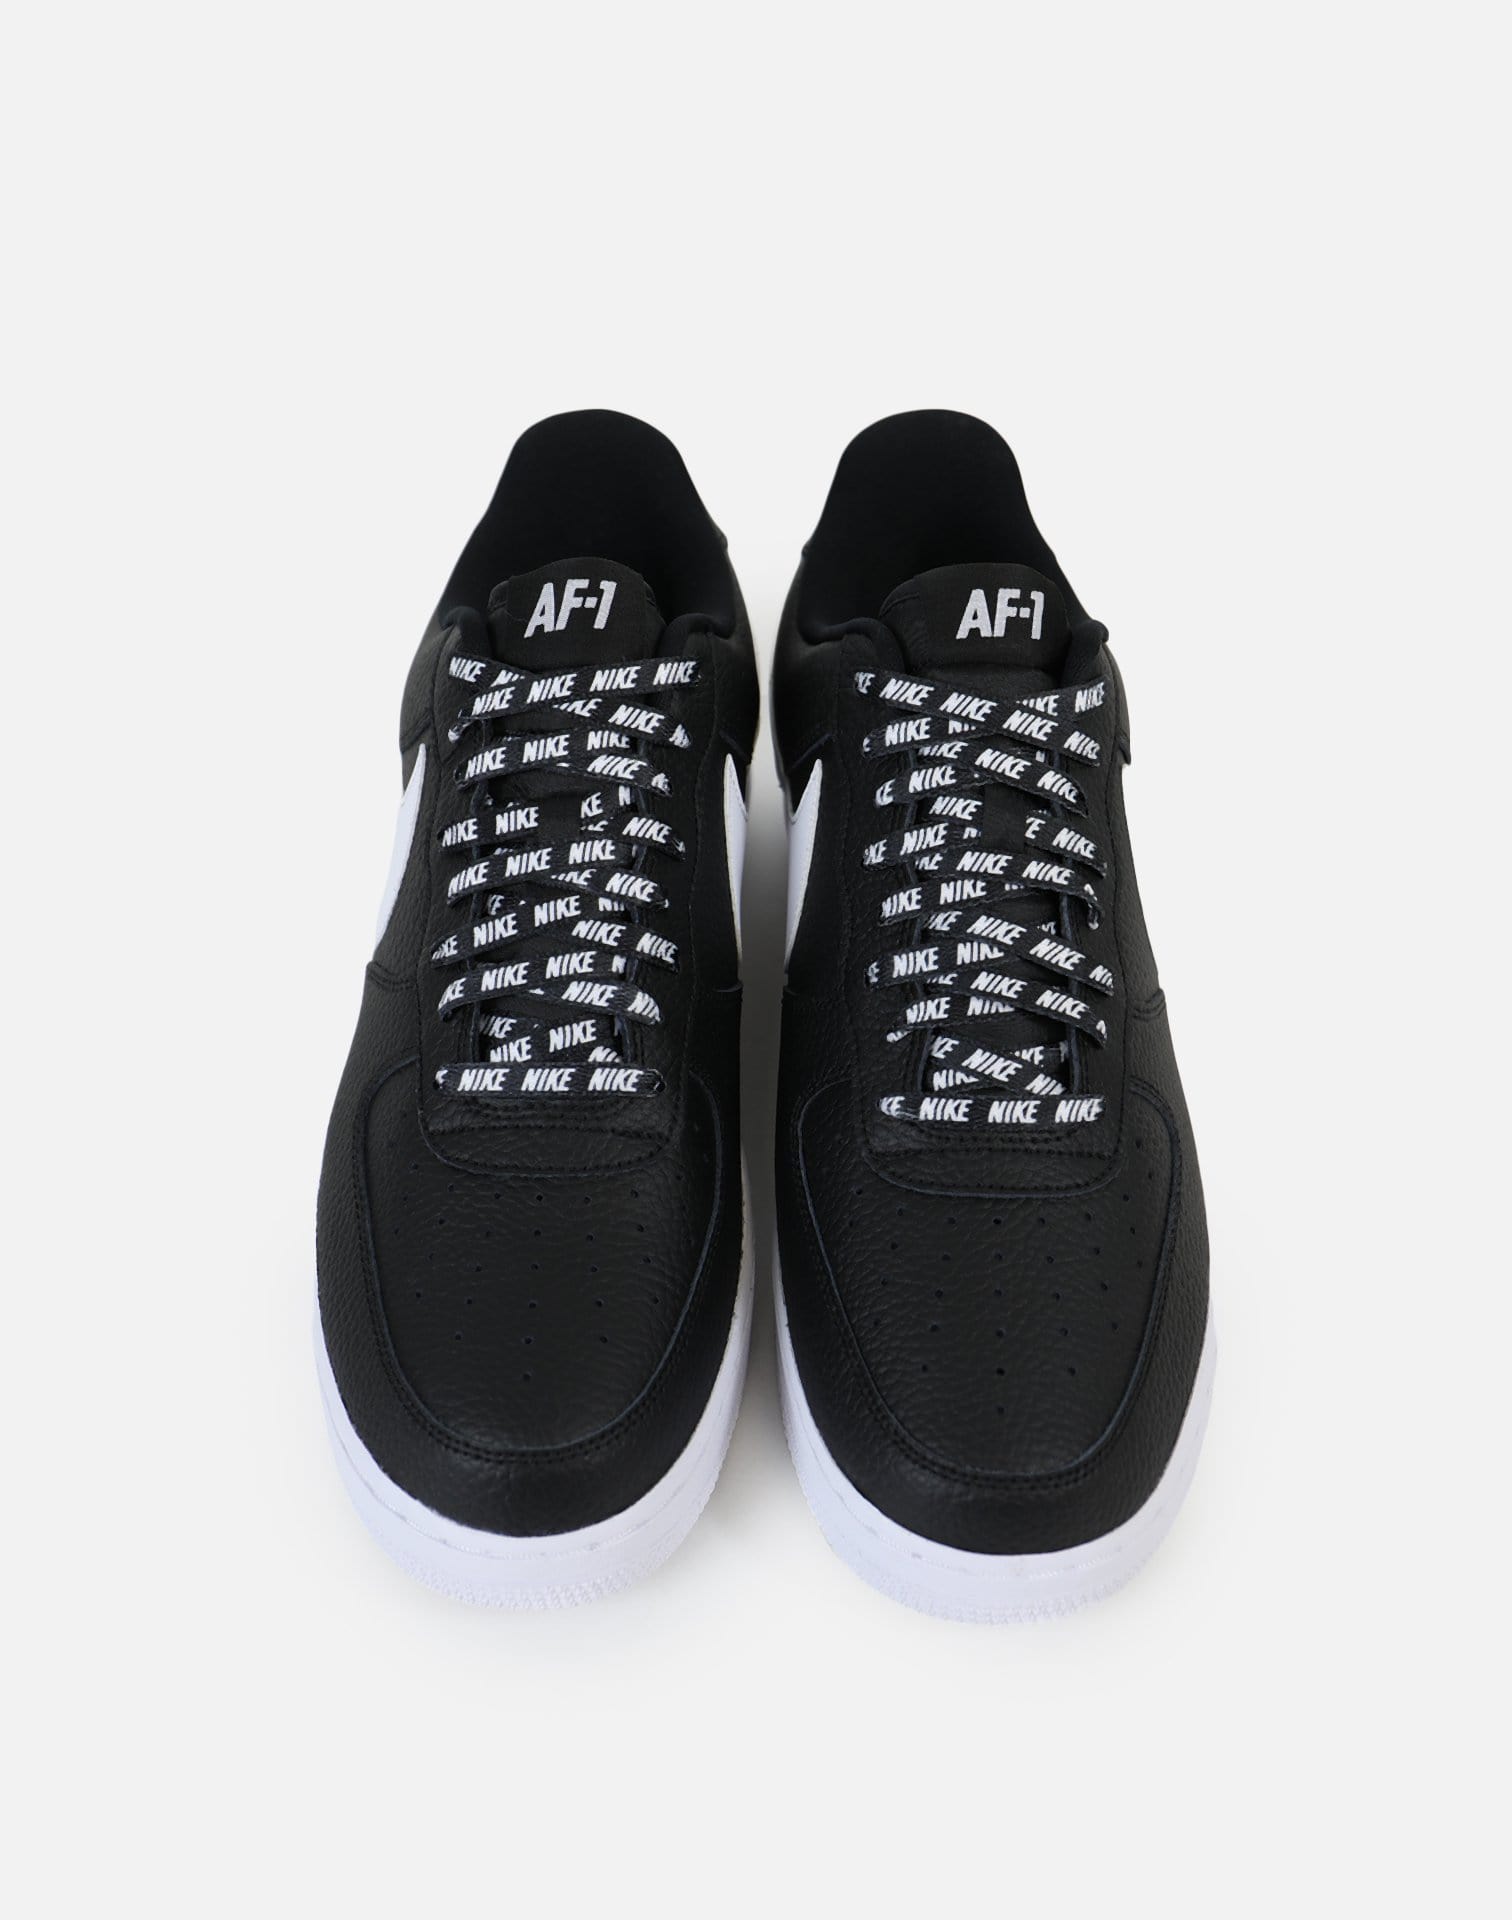 Nike Air Force 1 Low NBA 'Love For The 1' (Black/White-White)